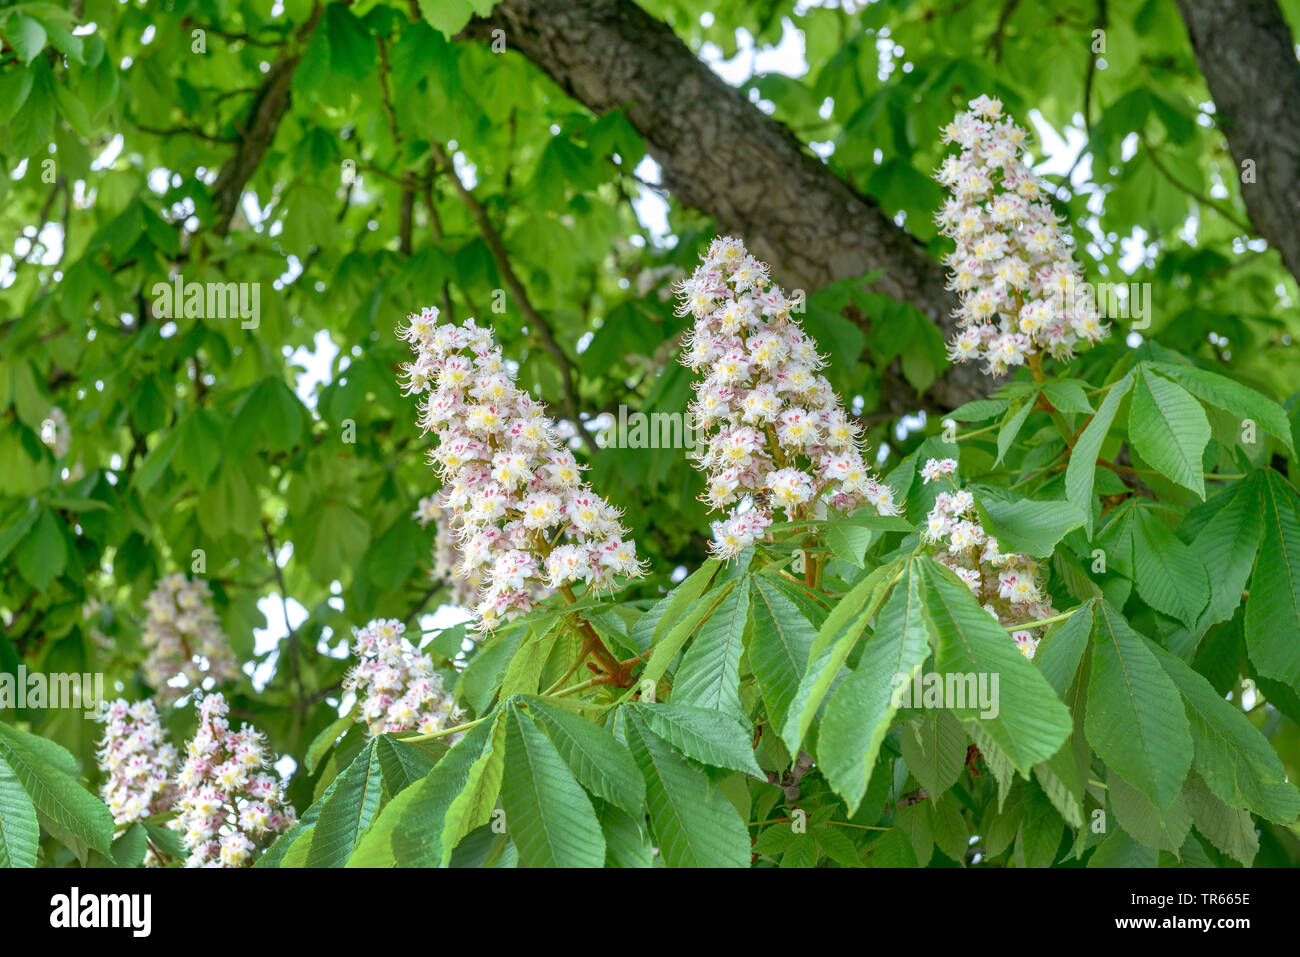 common horse chestnut (Aesculus hippocastanum), blooming branch, Germany Stock Photo